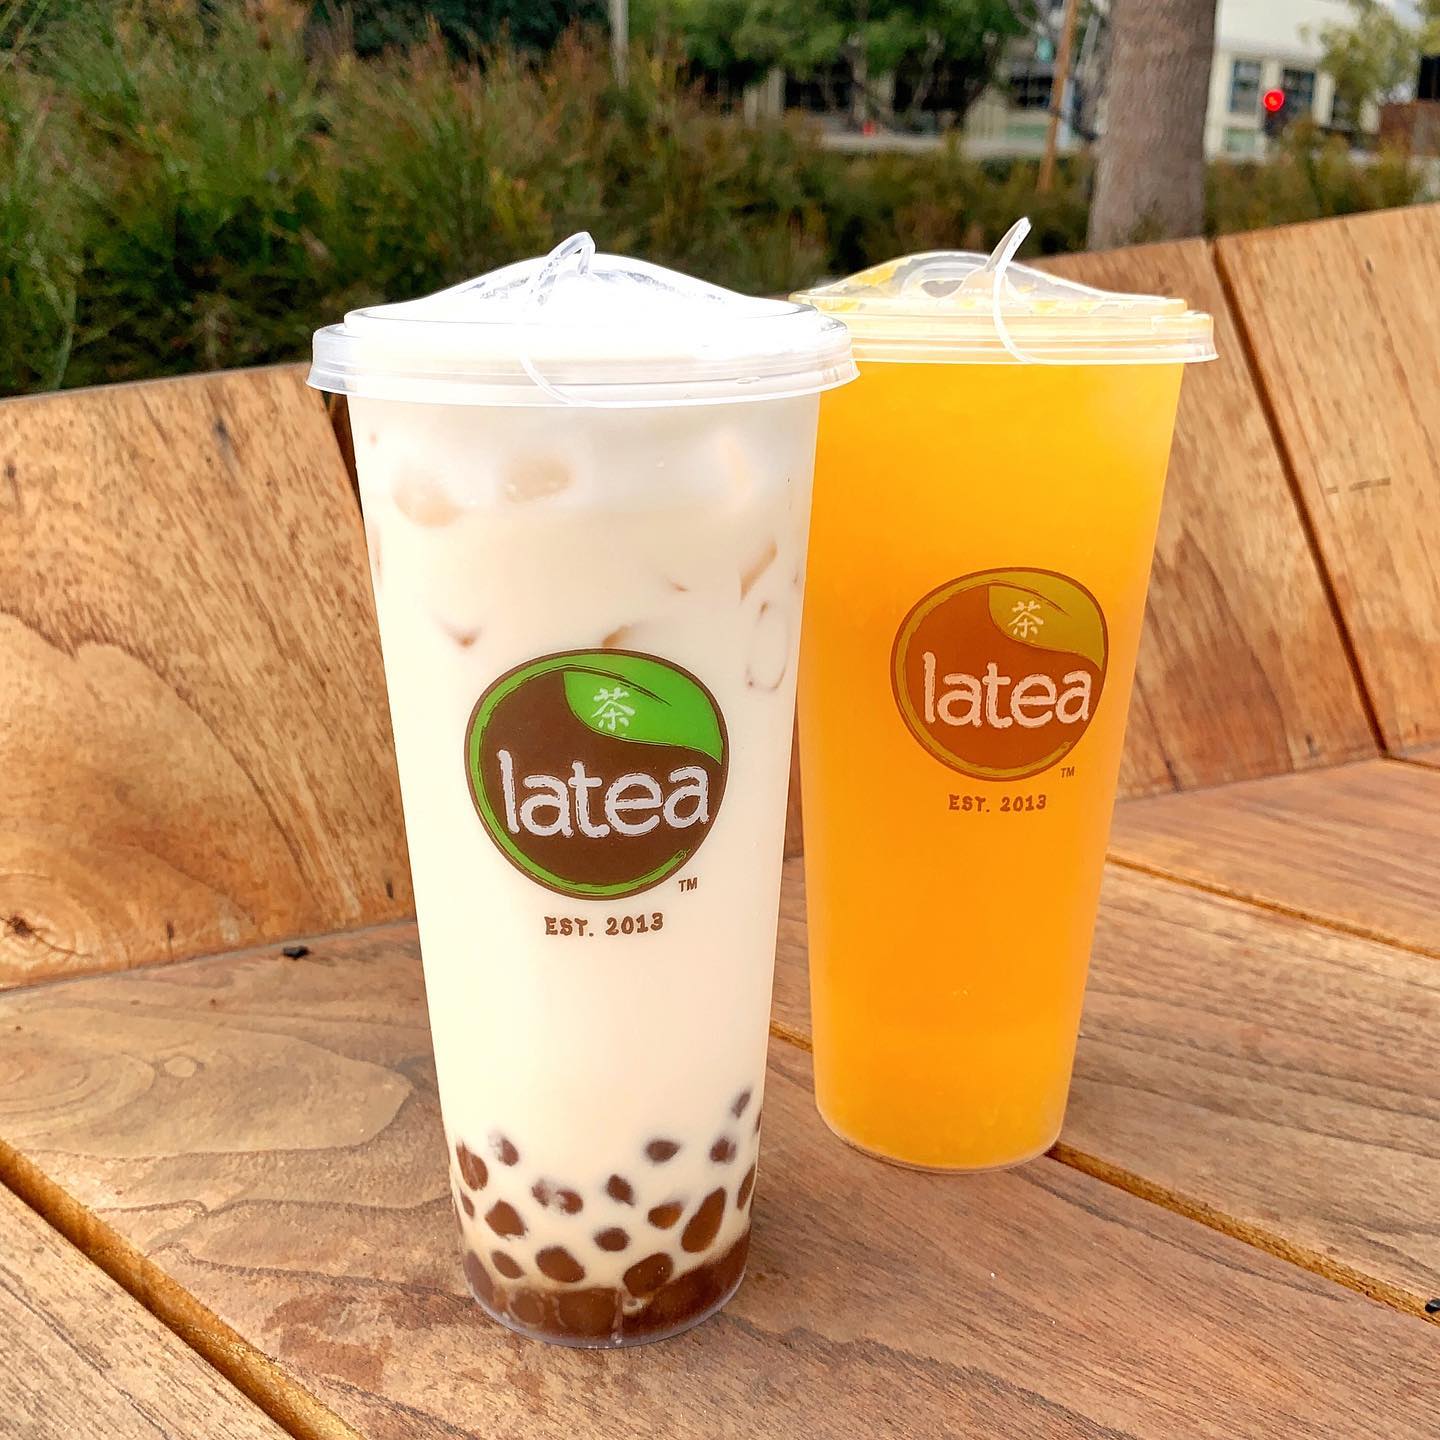 8 Great Spots for Boba and Bubble Tea in Indy Indy's Child Magazine